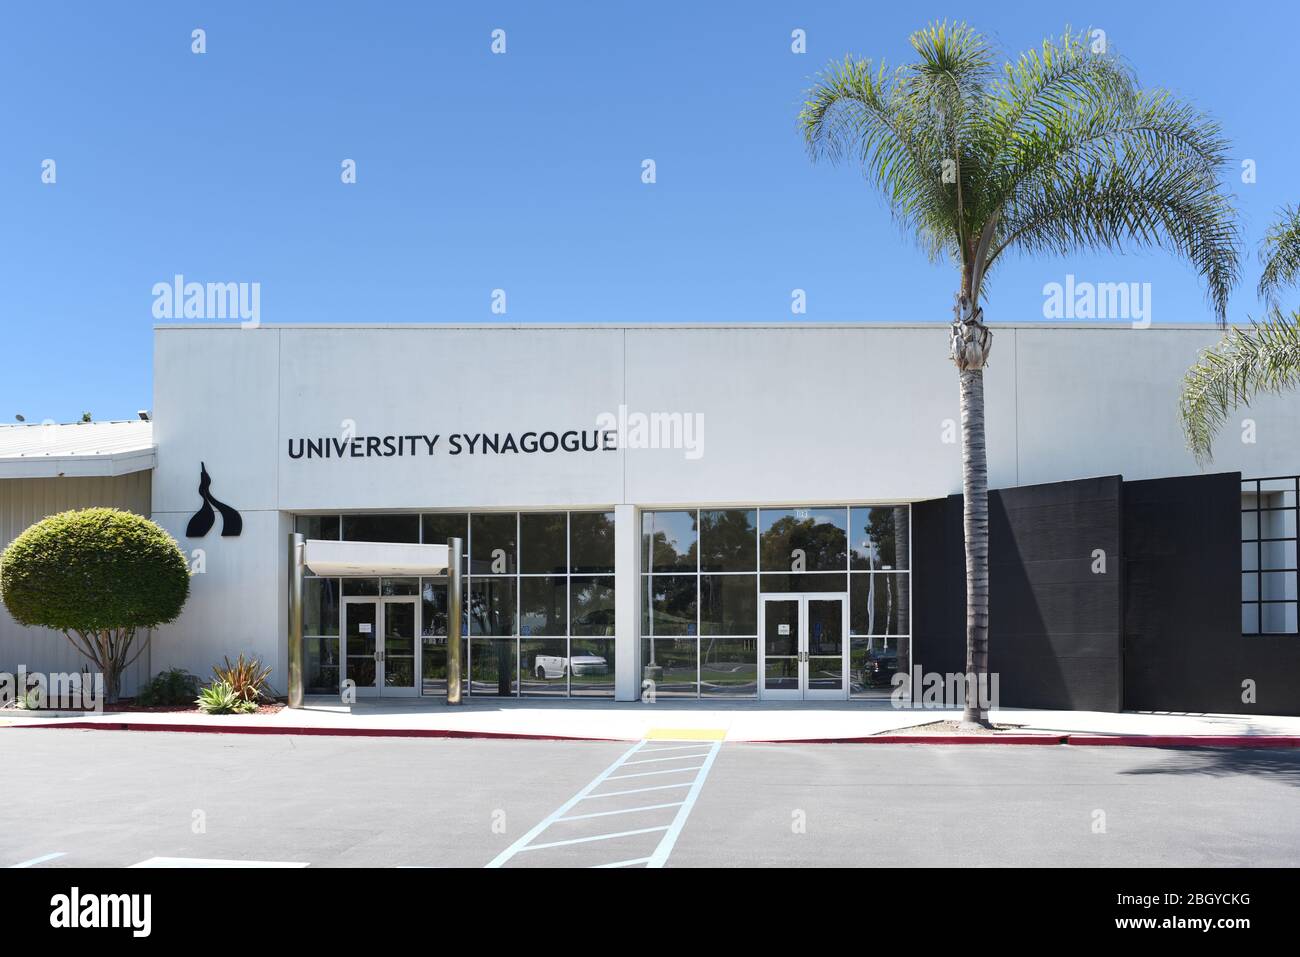 IRIVNE, CALIFORNIA - 21 APRIL 2020: University Synagogue, a Center of Innovative and Dynamic Judaism In Orange County. Stock Photo